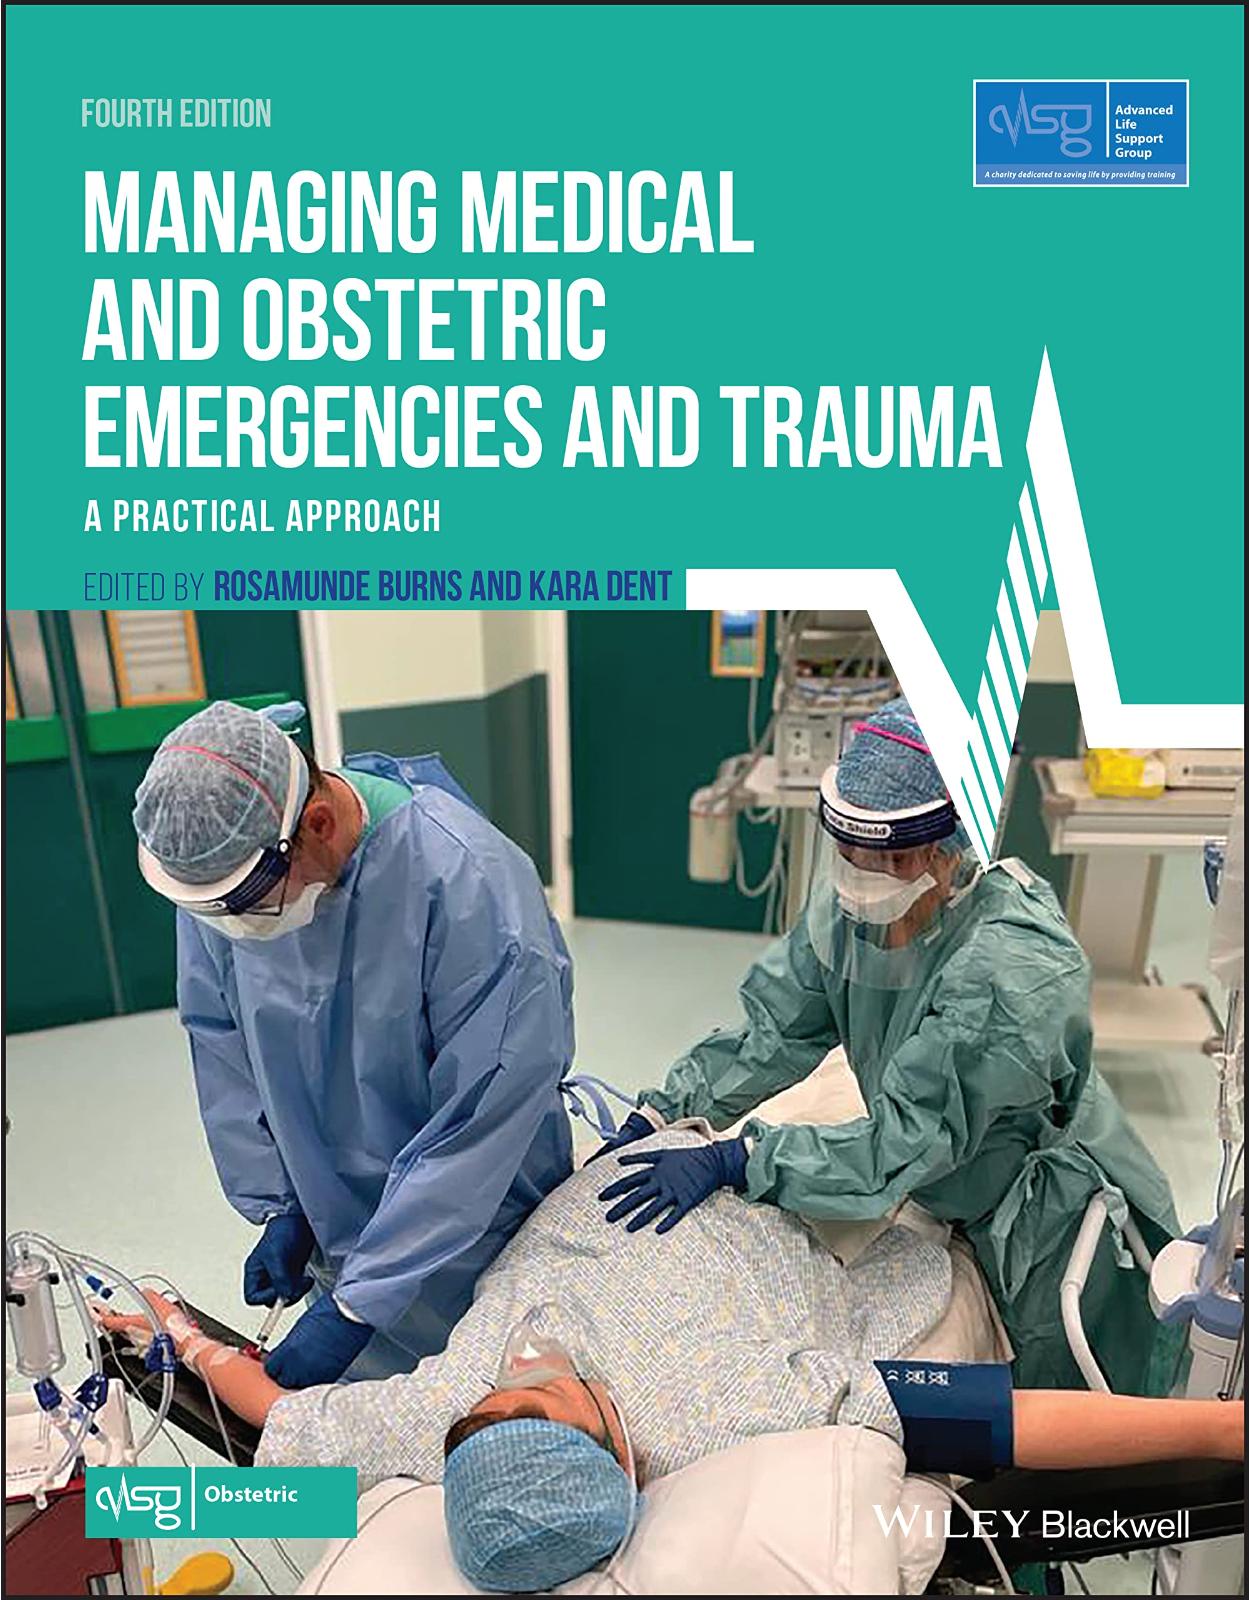 Managing Medical and Obstetric Emergencies and Trauma: A Practical Approach